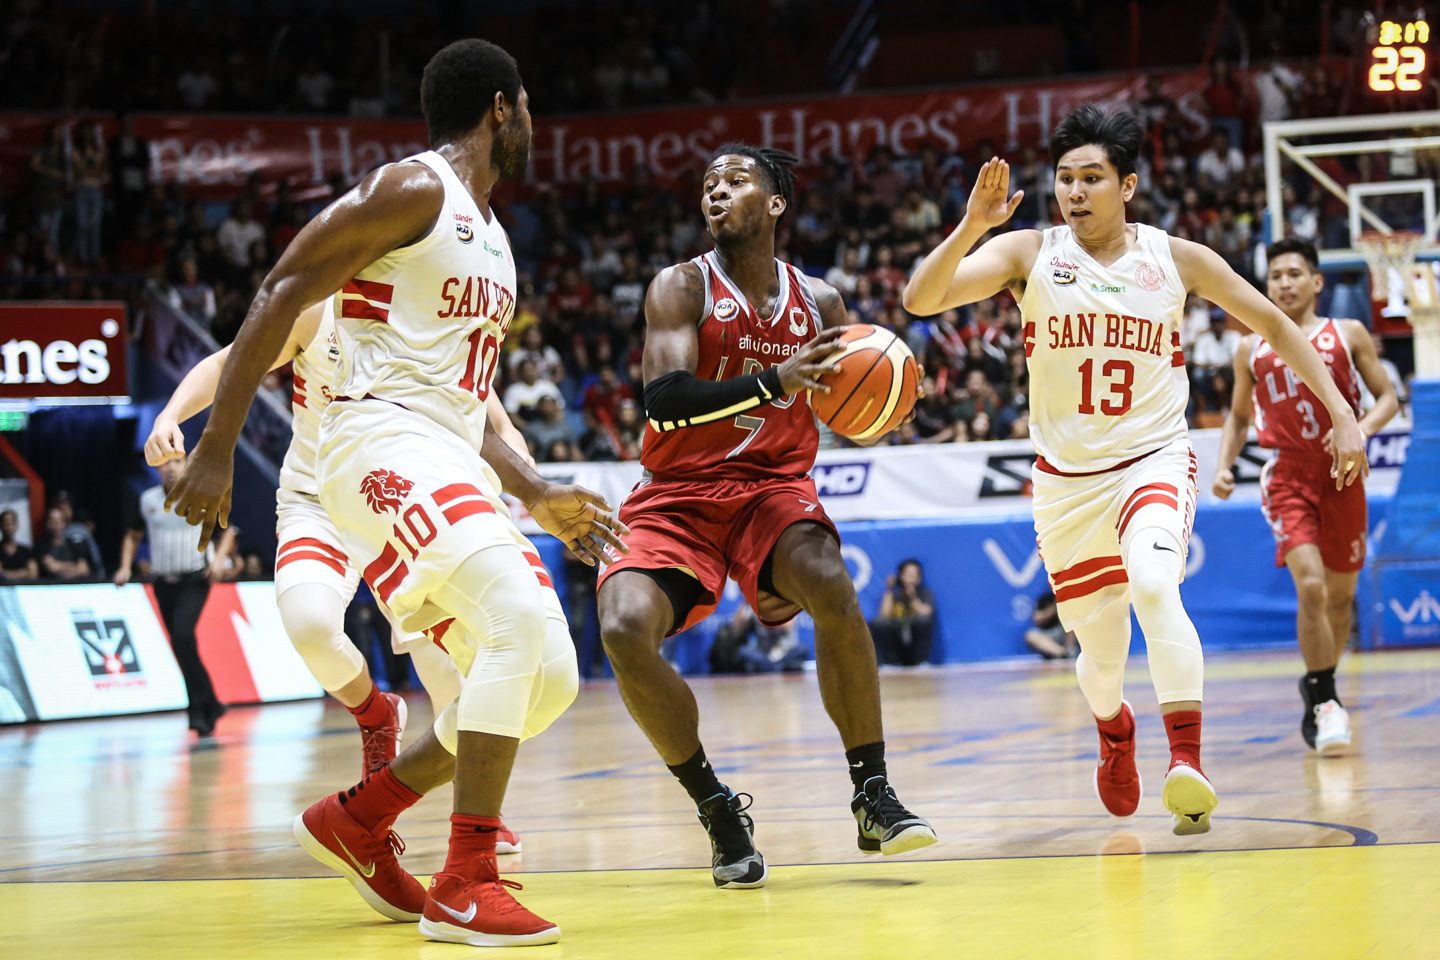 Lyceum downs San Beda in NCAA Finals rematch